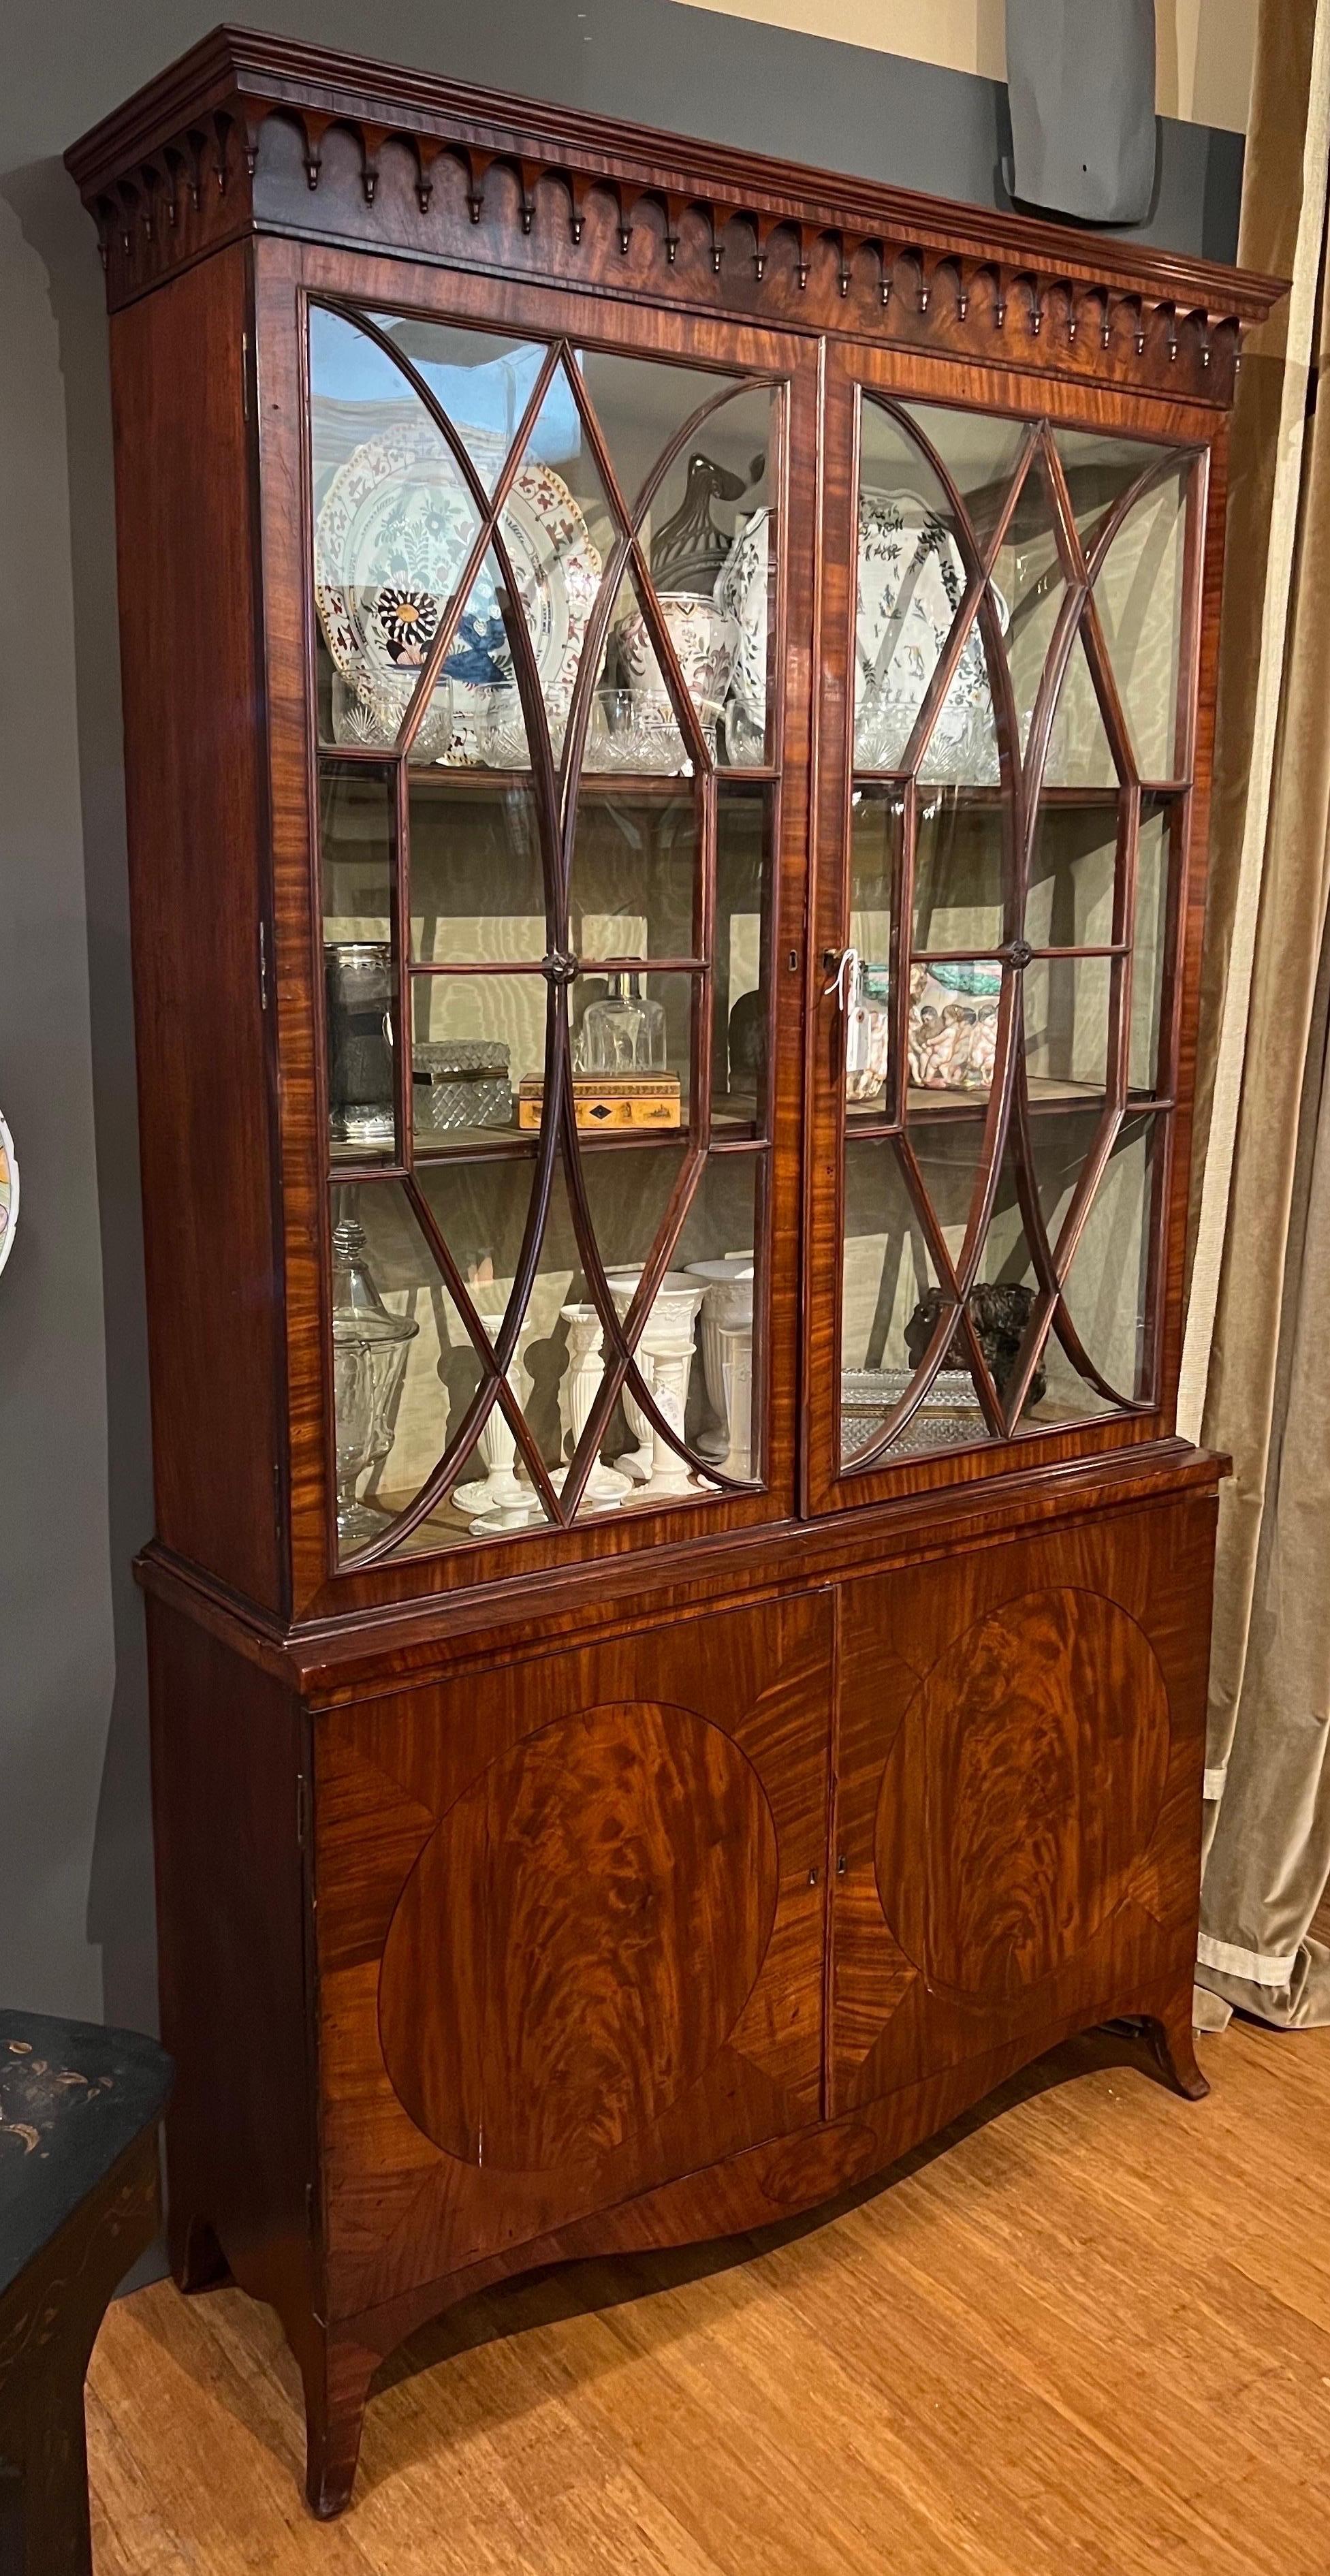 18th- early 19th century Georgian mahogany china or book press on original French feet. Two part cabinet form- bottom inlaid doors open to reveal linen slides. Very impressive piece with wonderful proportions.